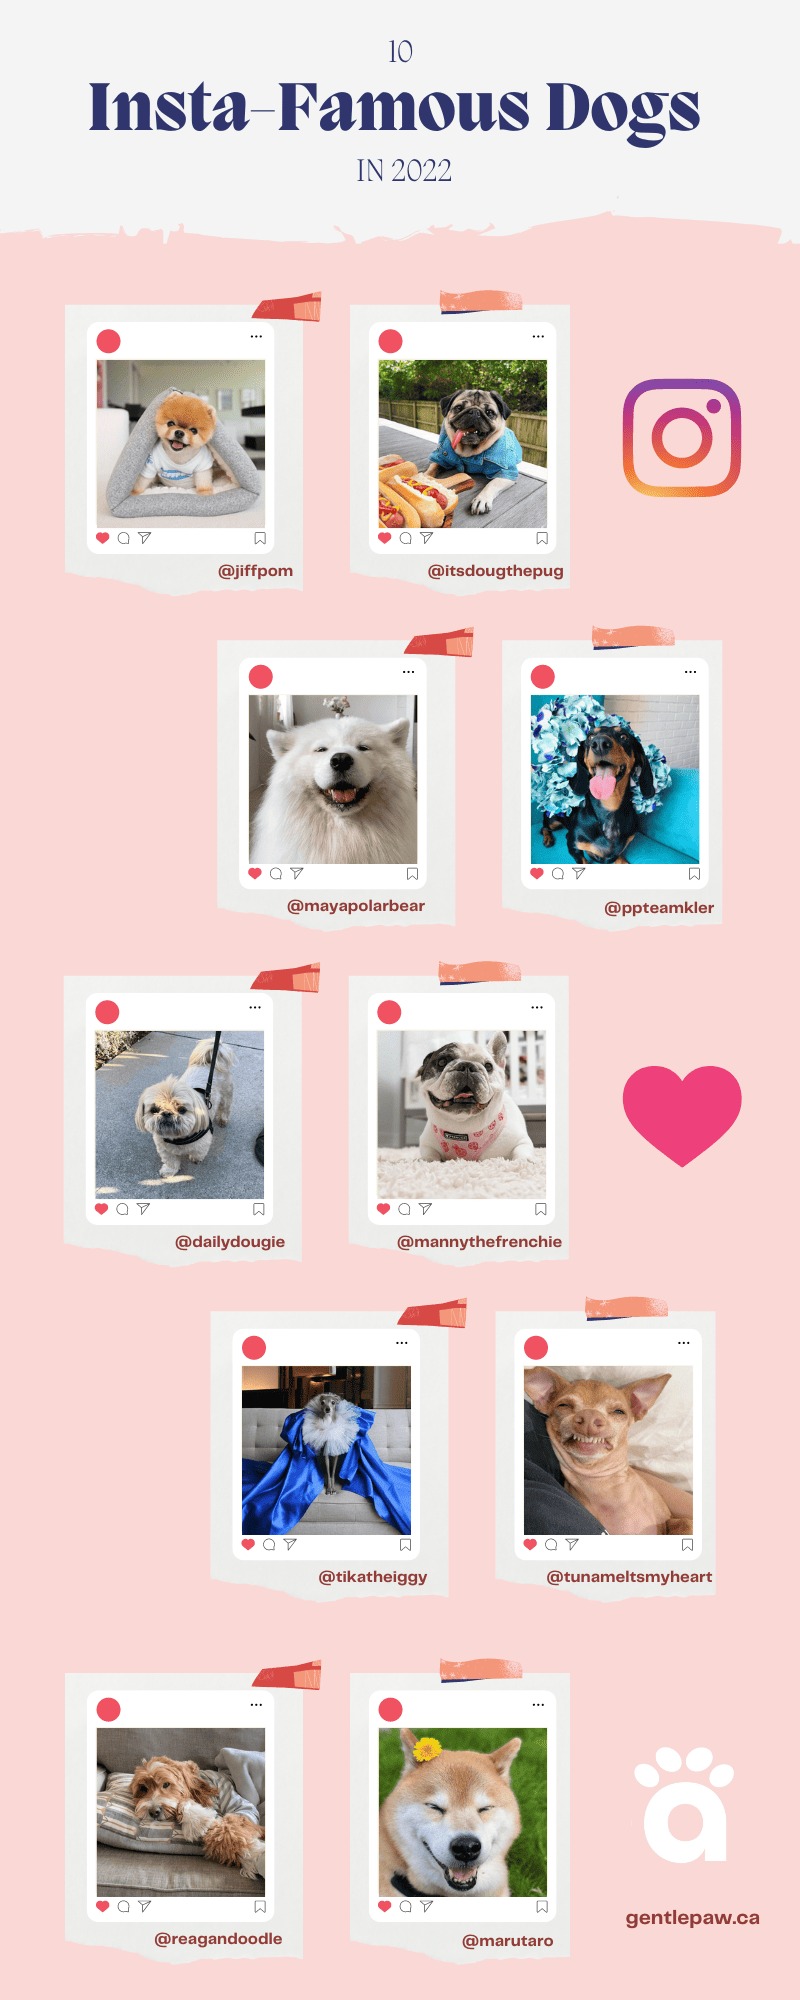 10 insta-famous dogs in 2022